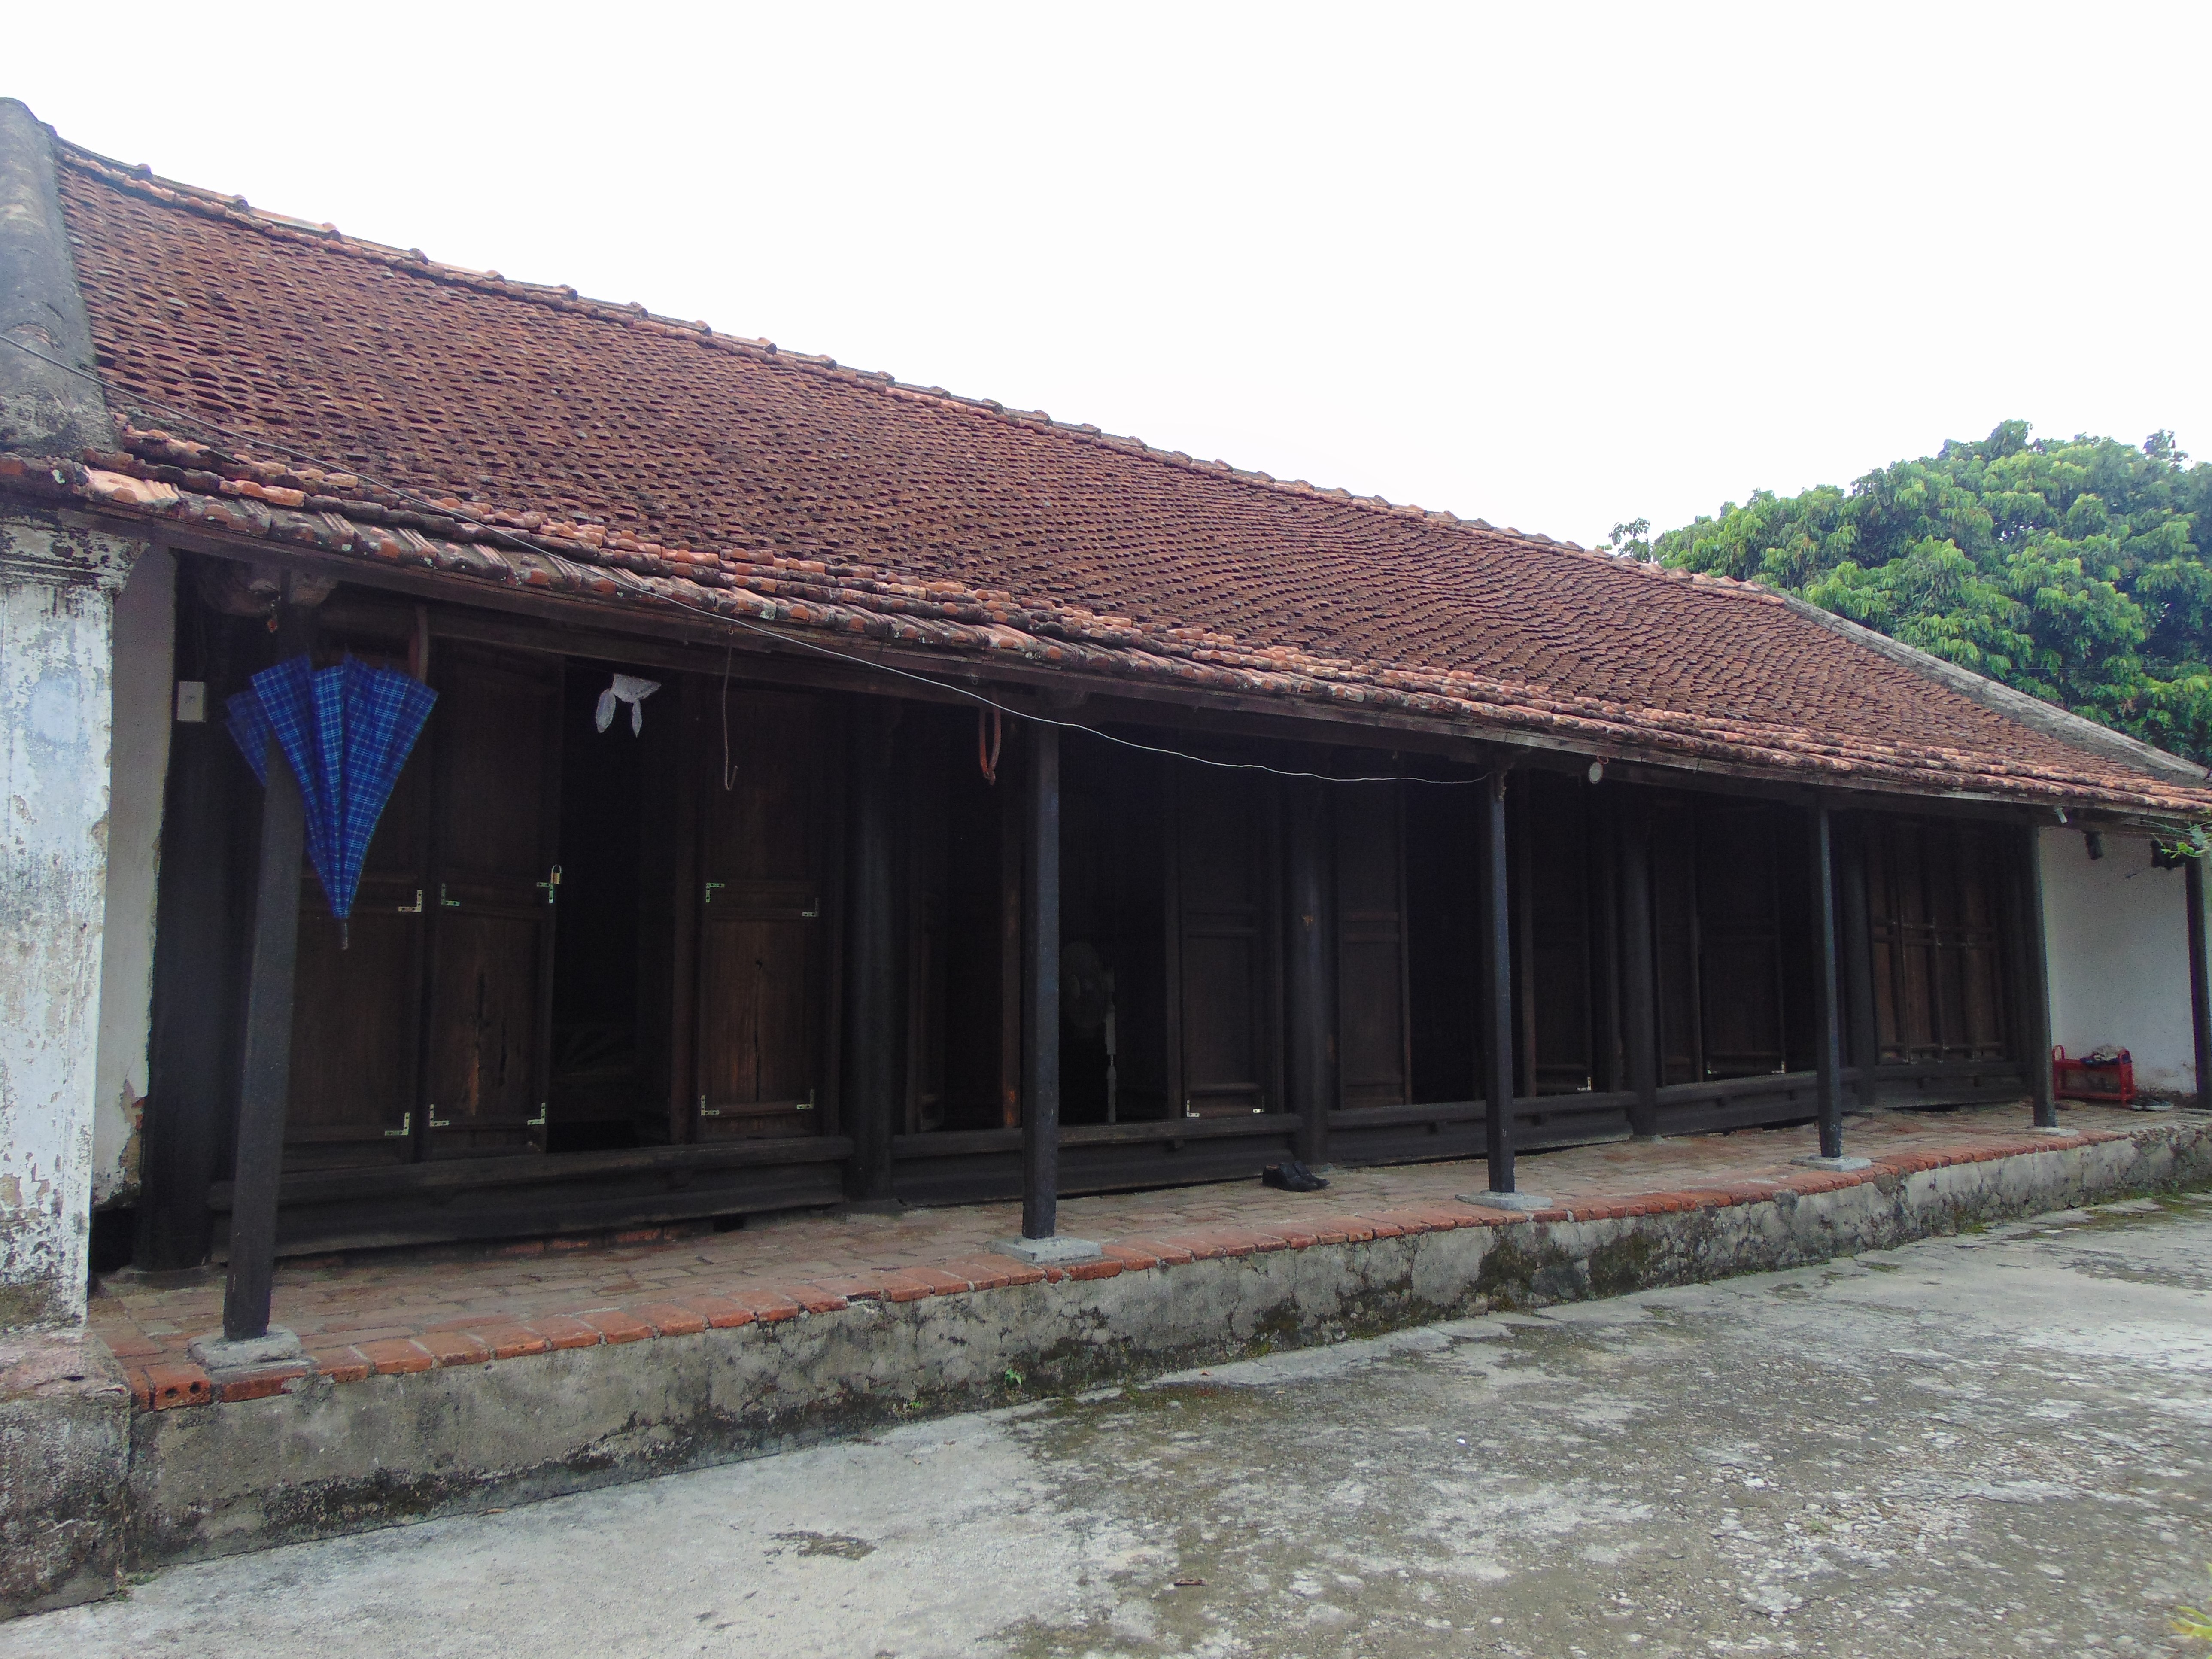 Explore the ancient space at Truong Yen ancient village